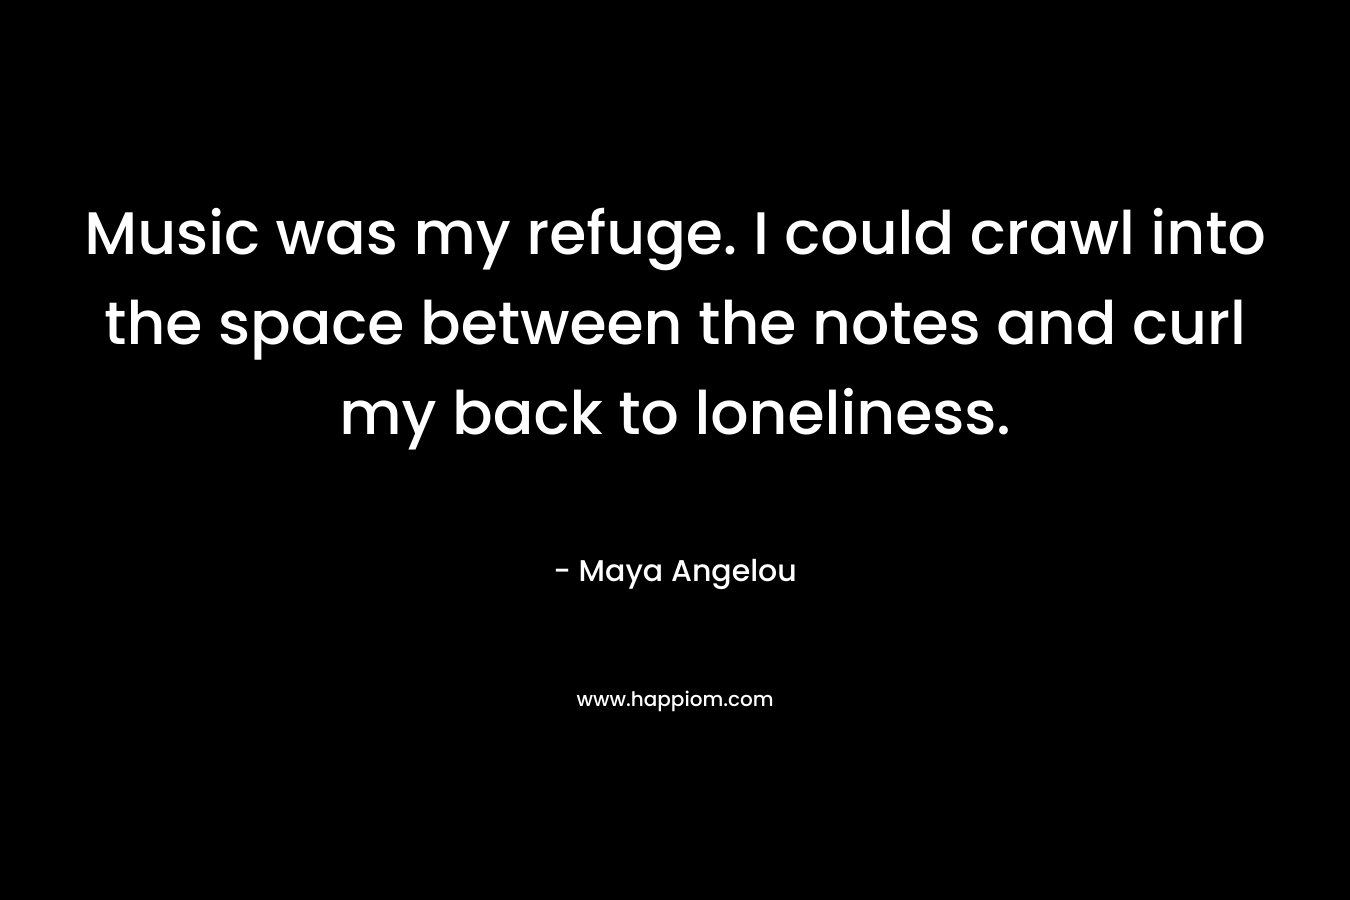 Music was my refuge. I could crawl into the space between the notes and curl my back to loneliness. – Maya Angelou